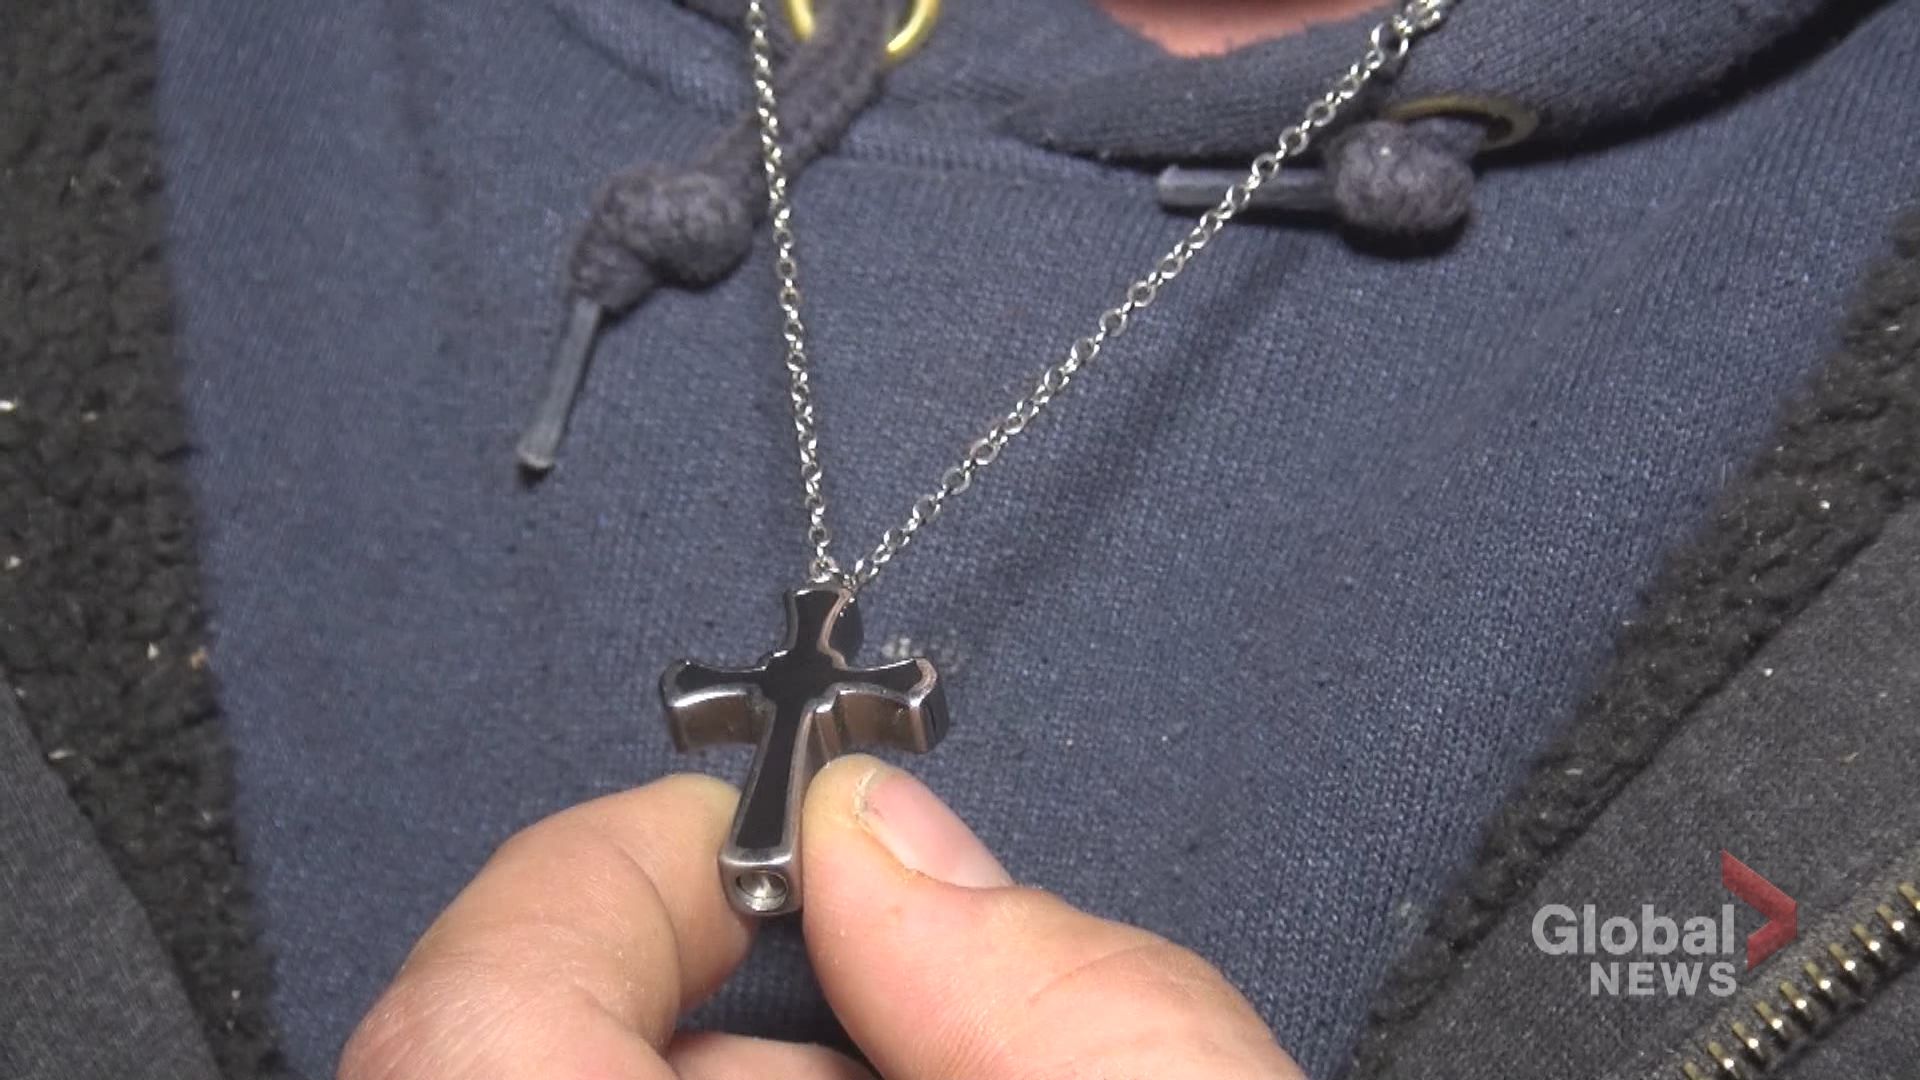 I'm so thankful': Peterborough man reunited with stolen pendant which  contained ashes of his deceased son